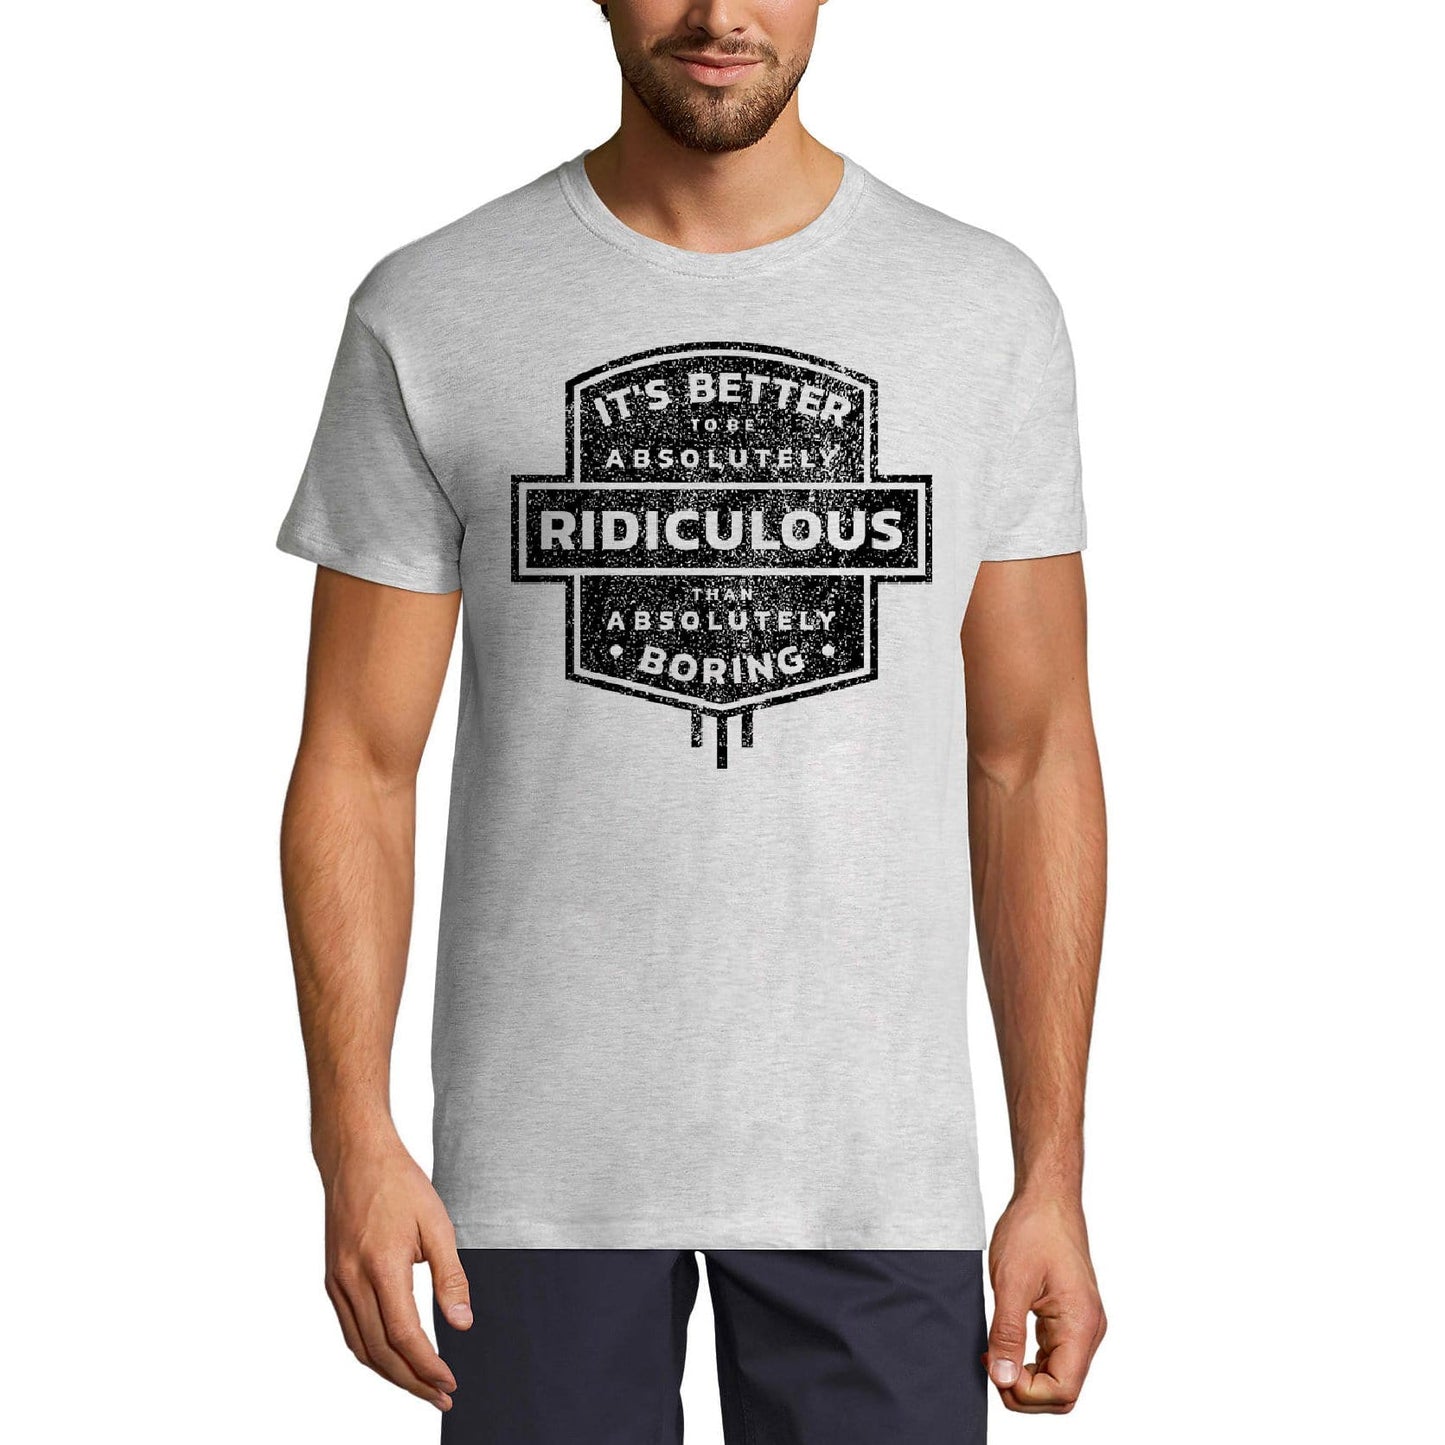 ULTRABASIC Men's T-Shirt It's Better To Be Absolutely Ridiculous Than Absolutely Boring - Short Sleeve Tee shirt